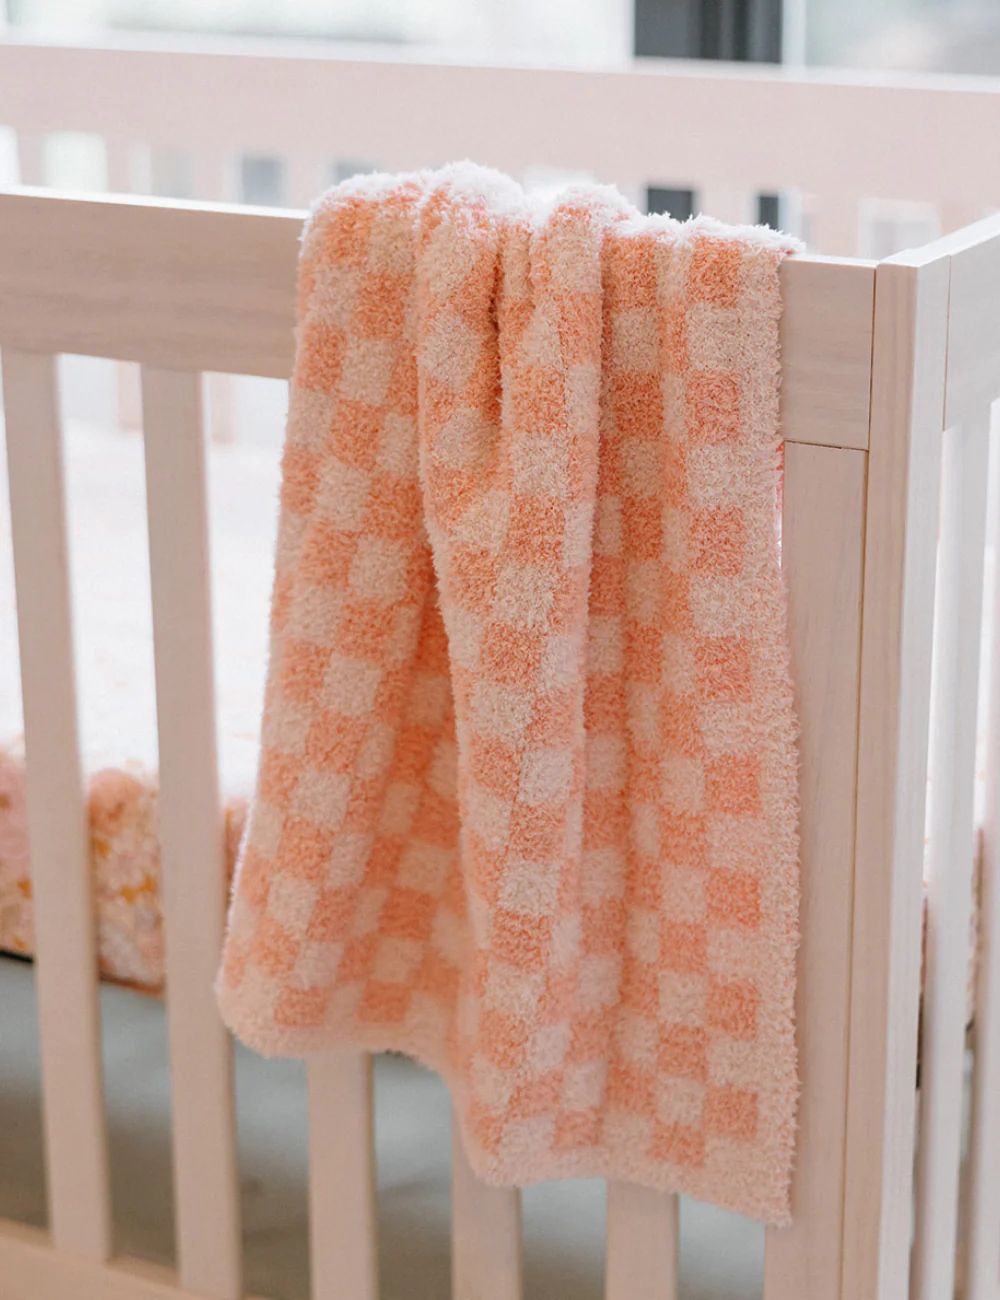 TSC x Madi Nelson: Children's Mini Checkered Buttery Blankets | The Styled Collection